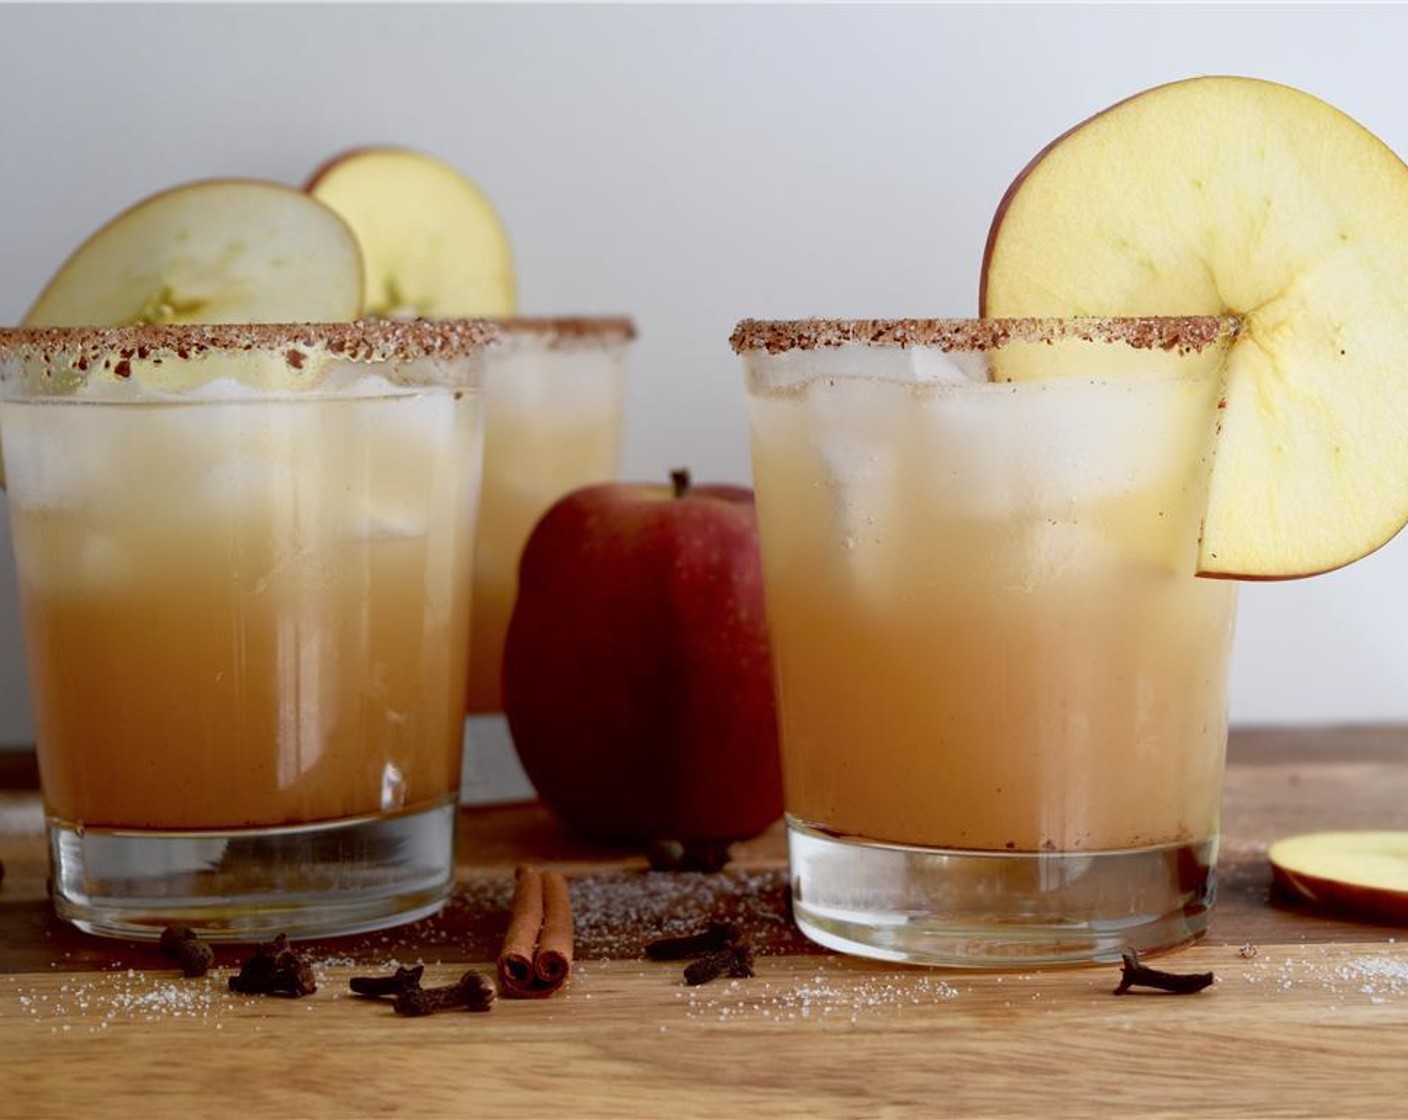 step 5 Add Ice (to taste) to the glasses, divide the margaritas between them, and garnish with apple slices. Serve and enjoy!